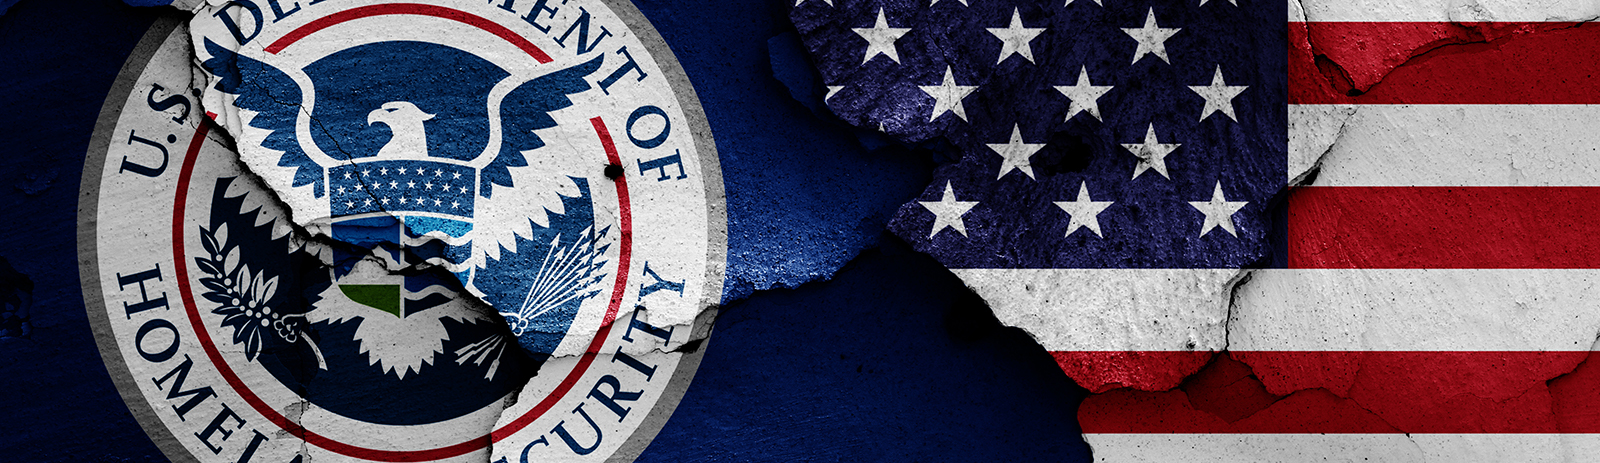 U.S. Department of Home Security Emblem on an American Flag